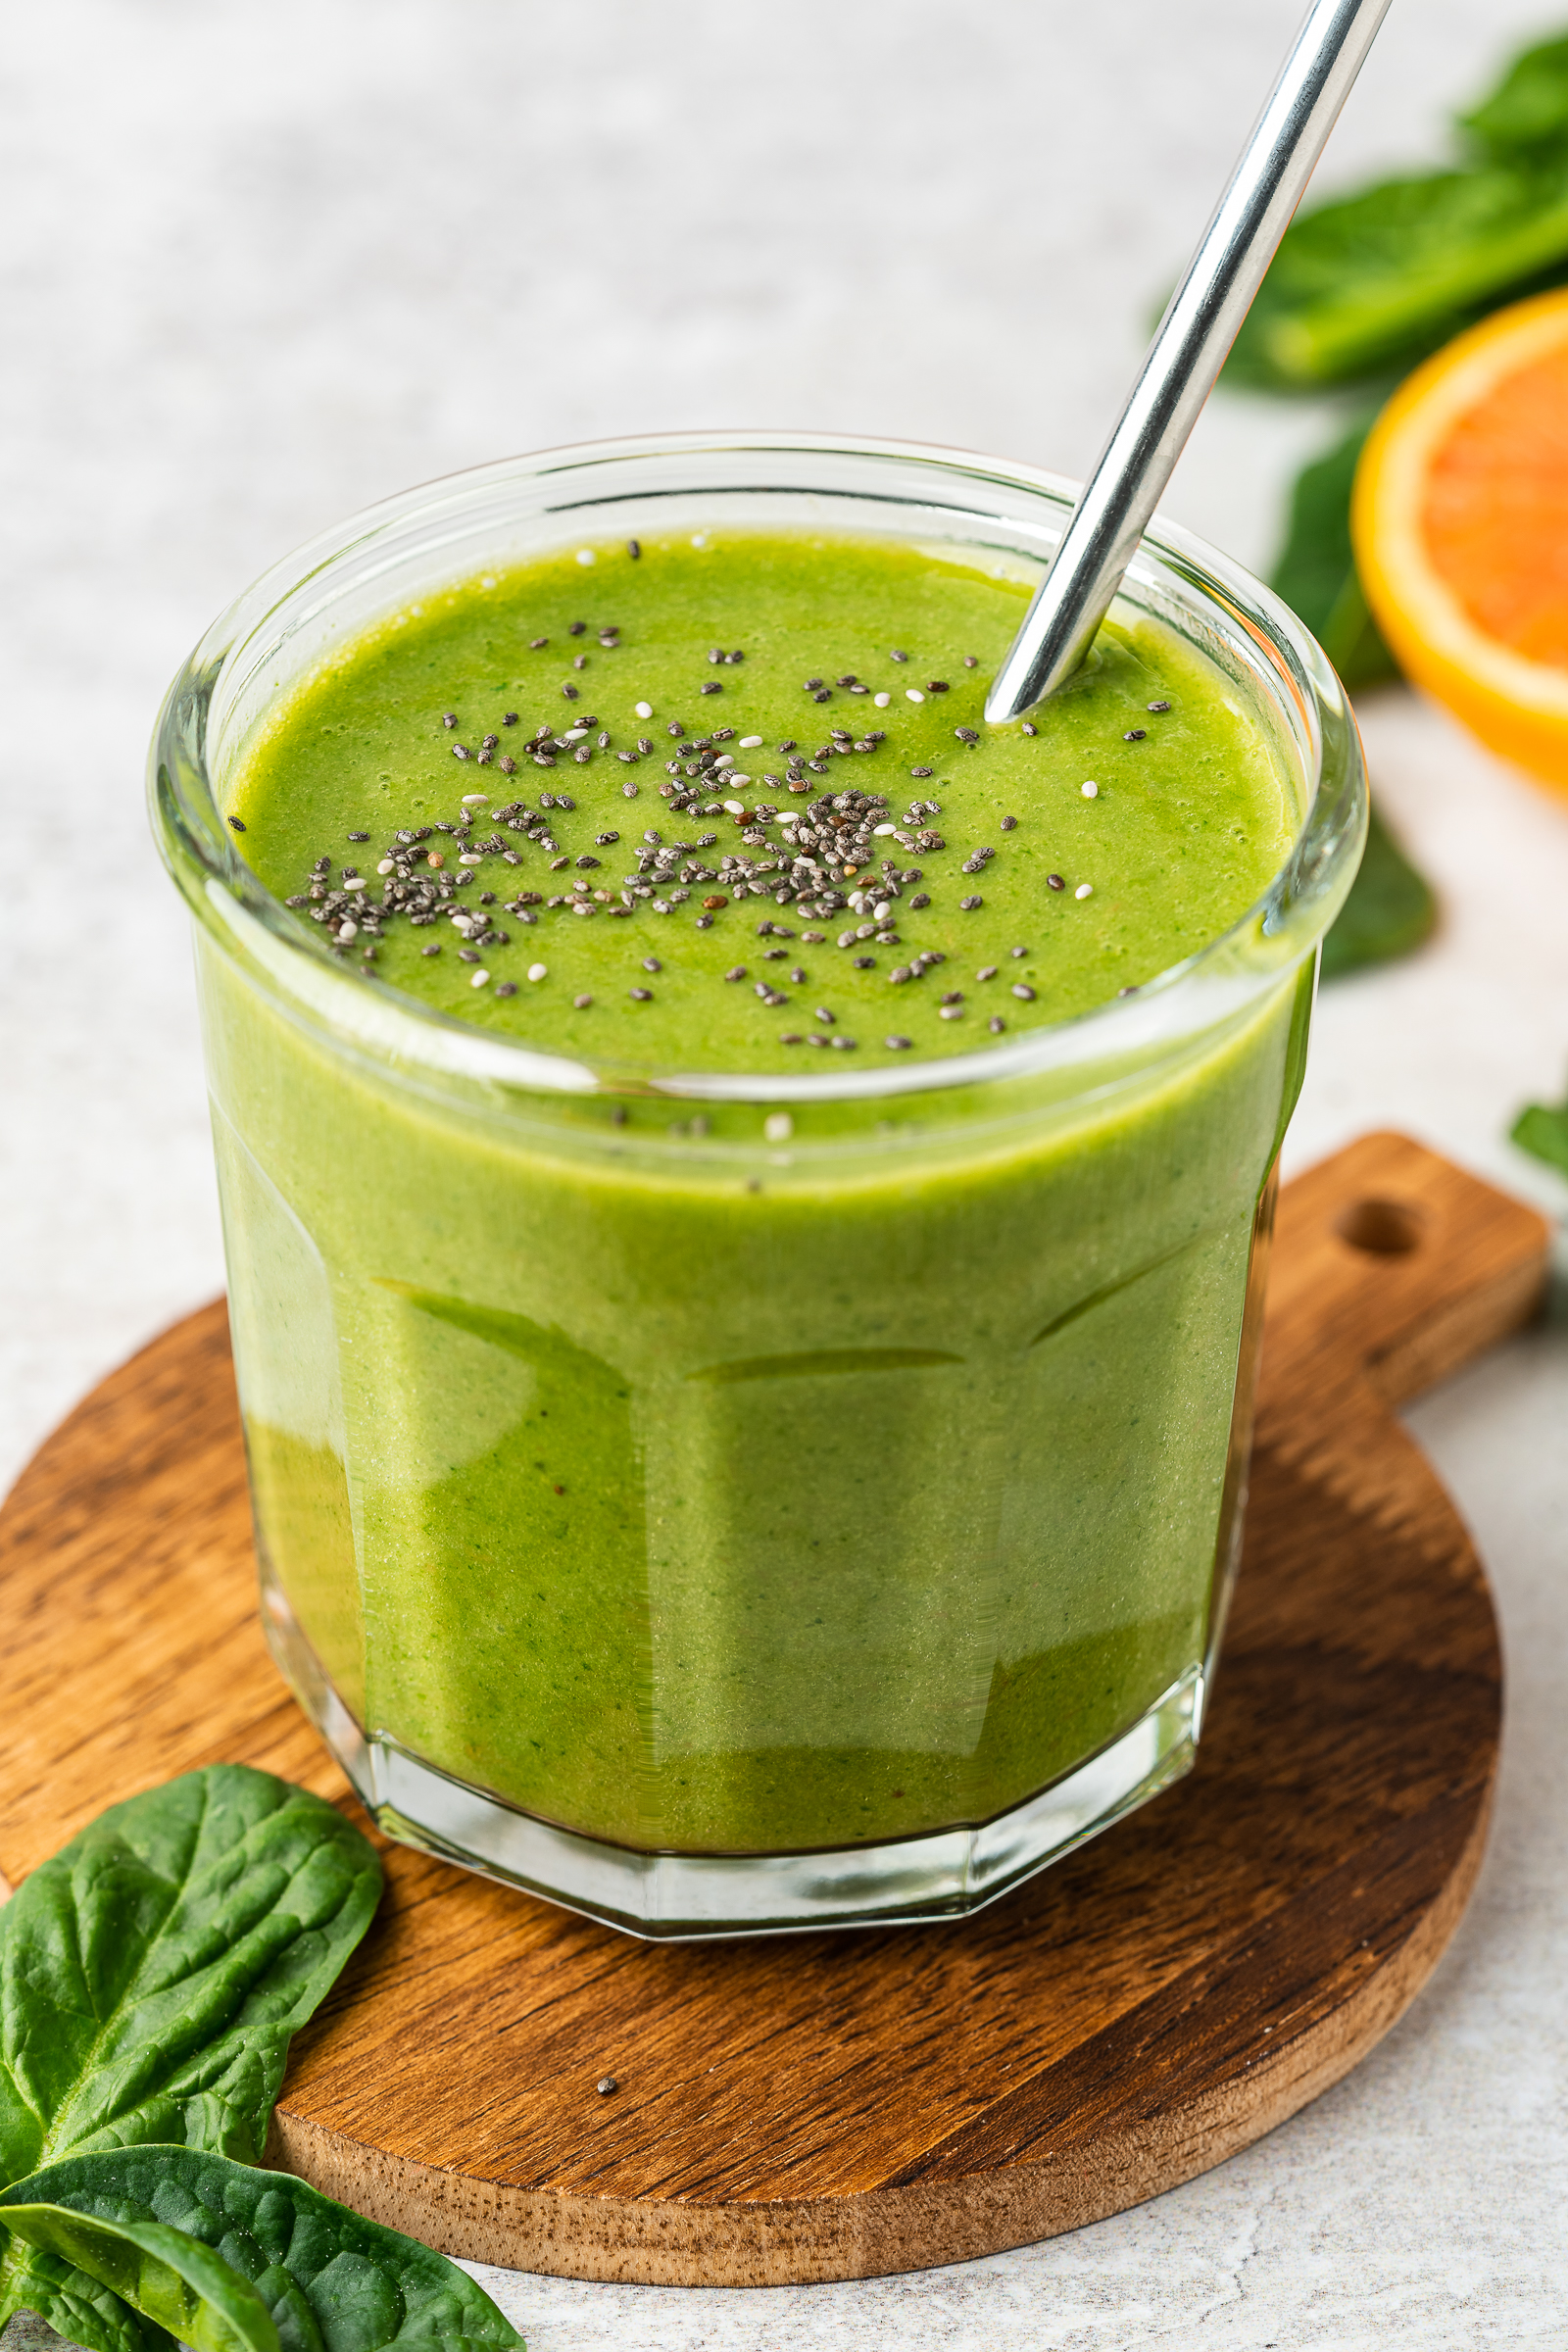 Orange spinach smoothie in a glass jar garnished with chia seeds.